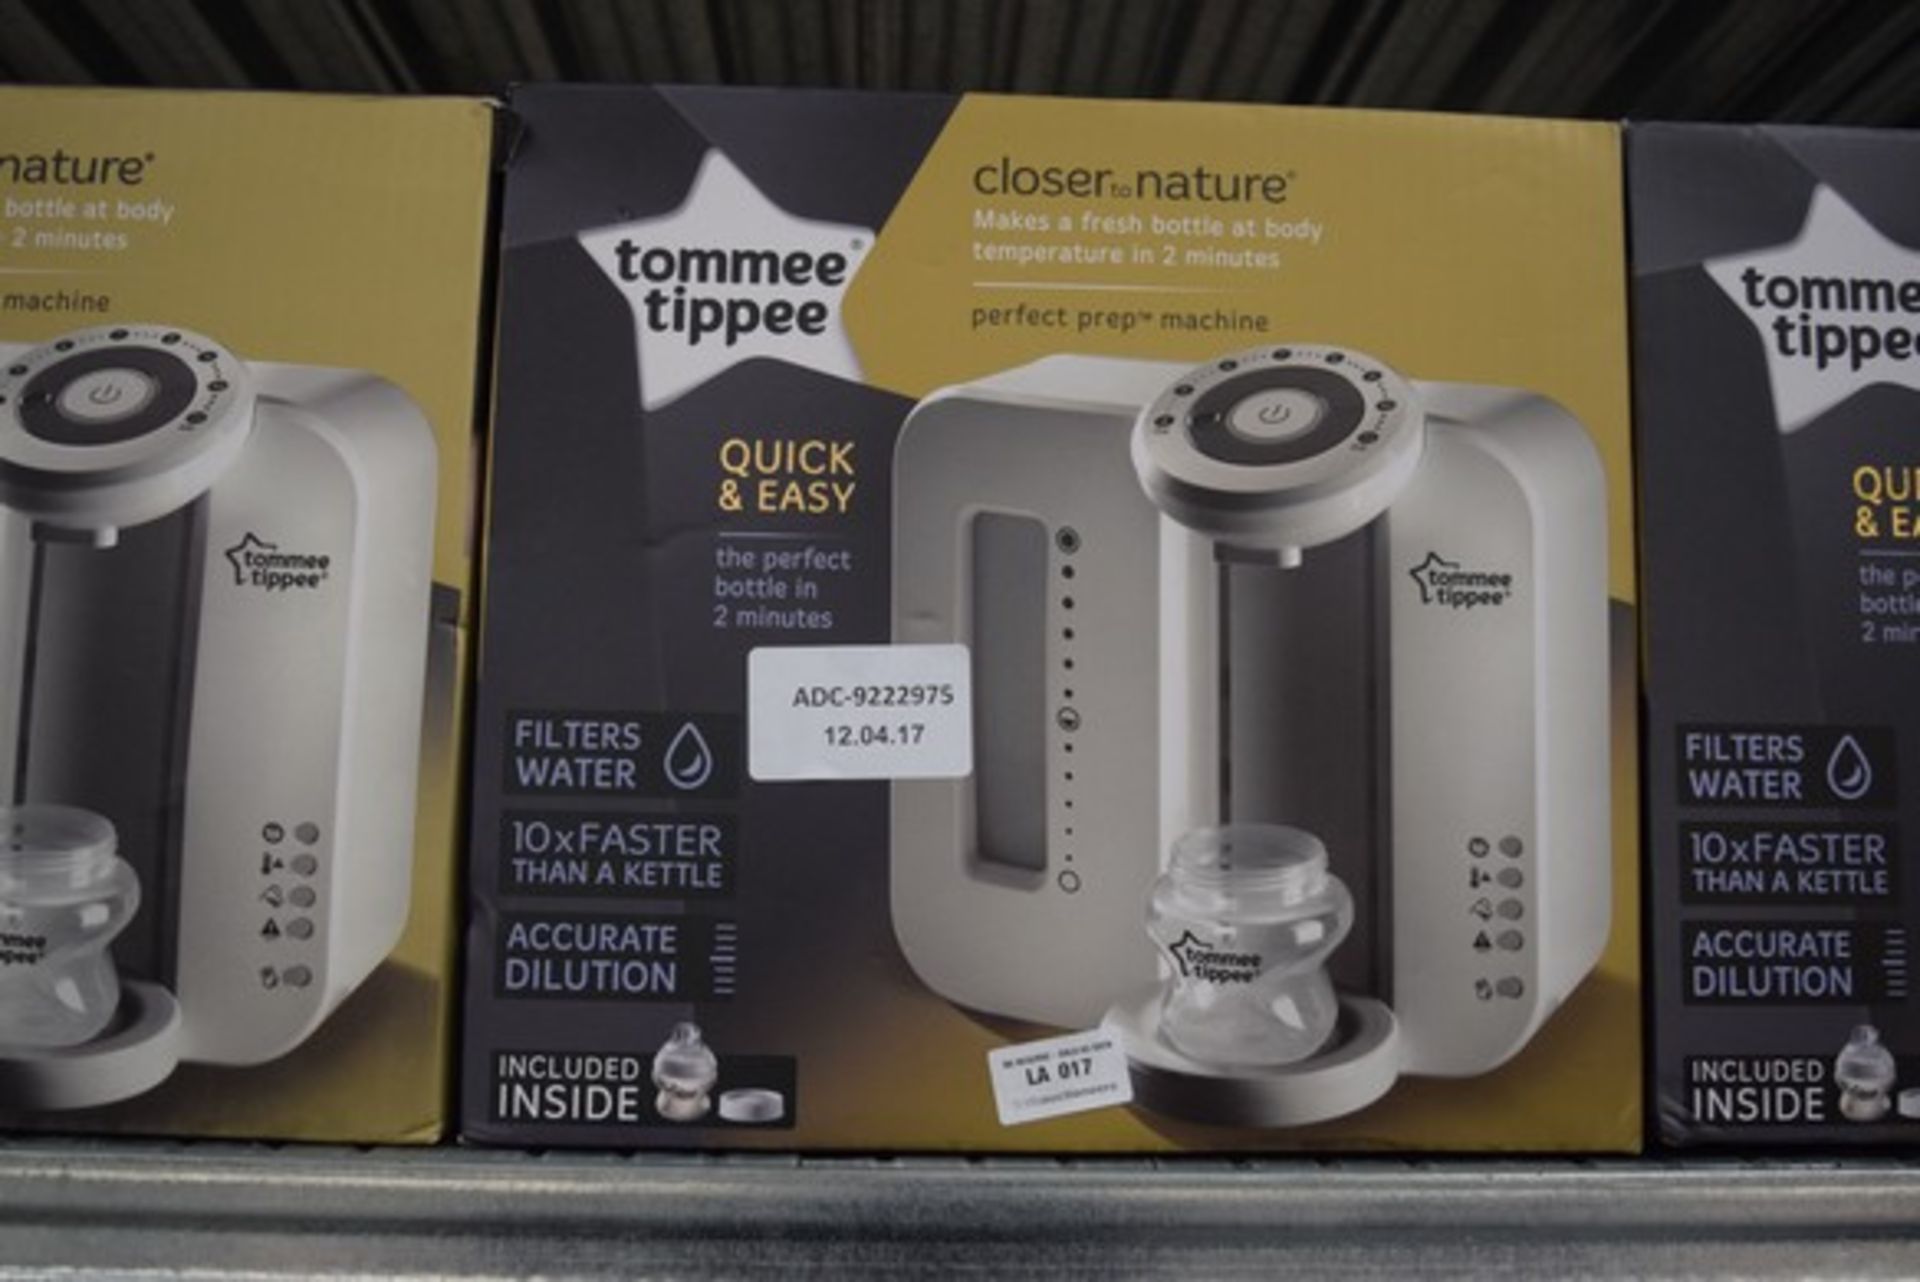 1 X BOXED TOMMEE TIPPEE CLOSER TO NATURE PERFECT PREP MACHINE RRP £70 (12.04.2017)